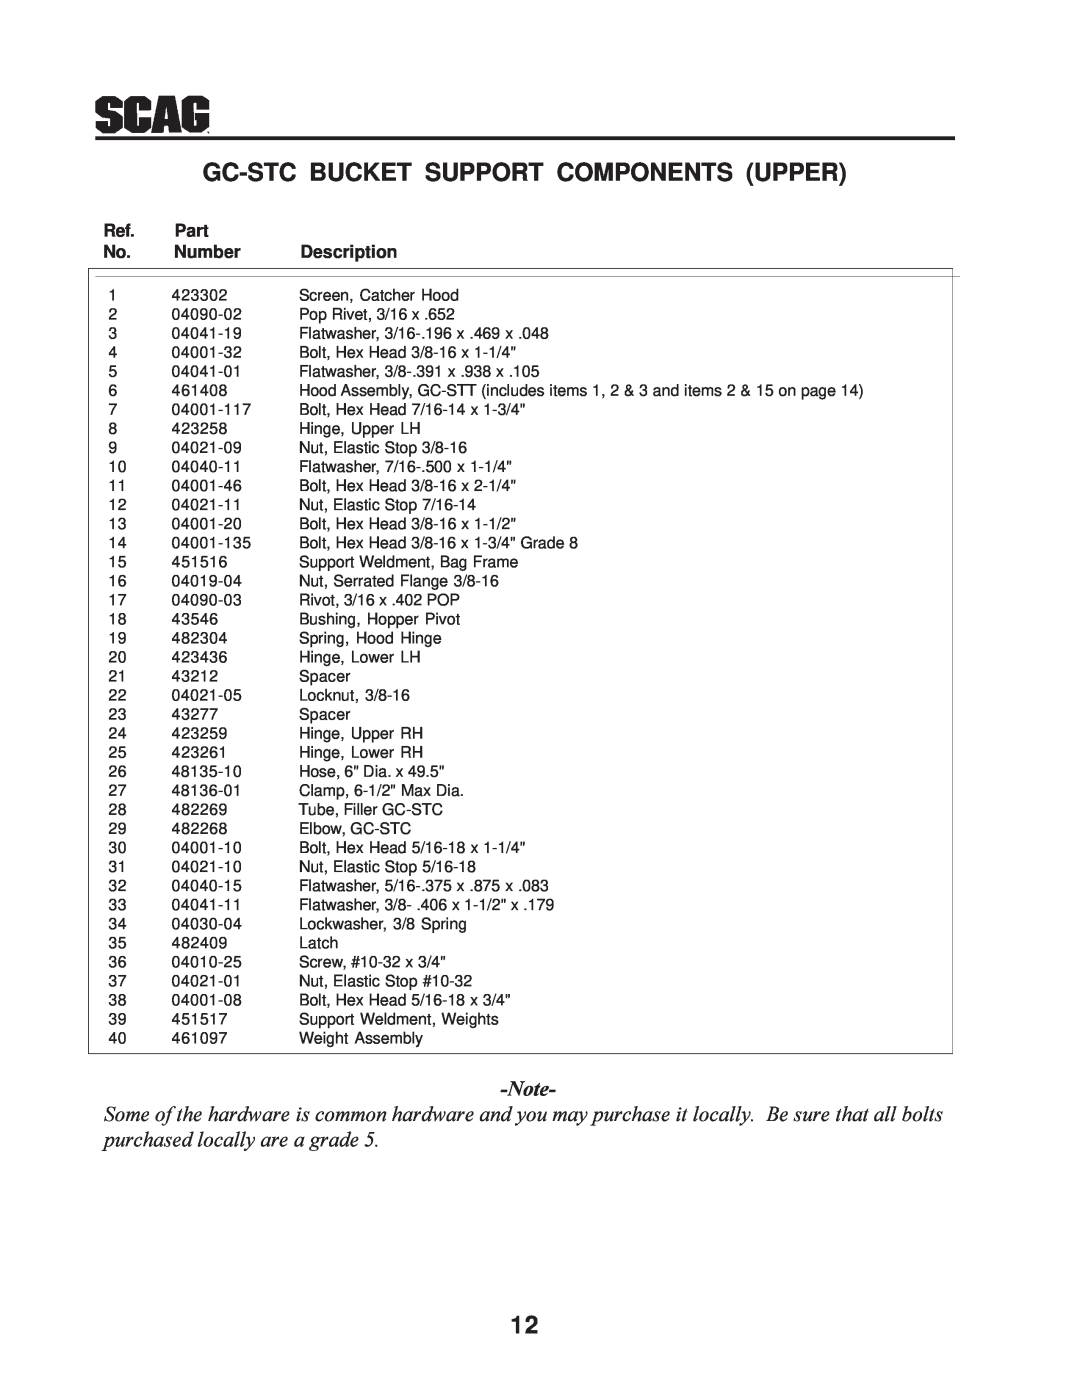 Scag Power Equipment GC-STC manual Gc-Stc Bucket Support Components Upper, Part, Number, Description, 423302 